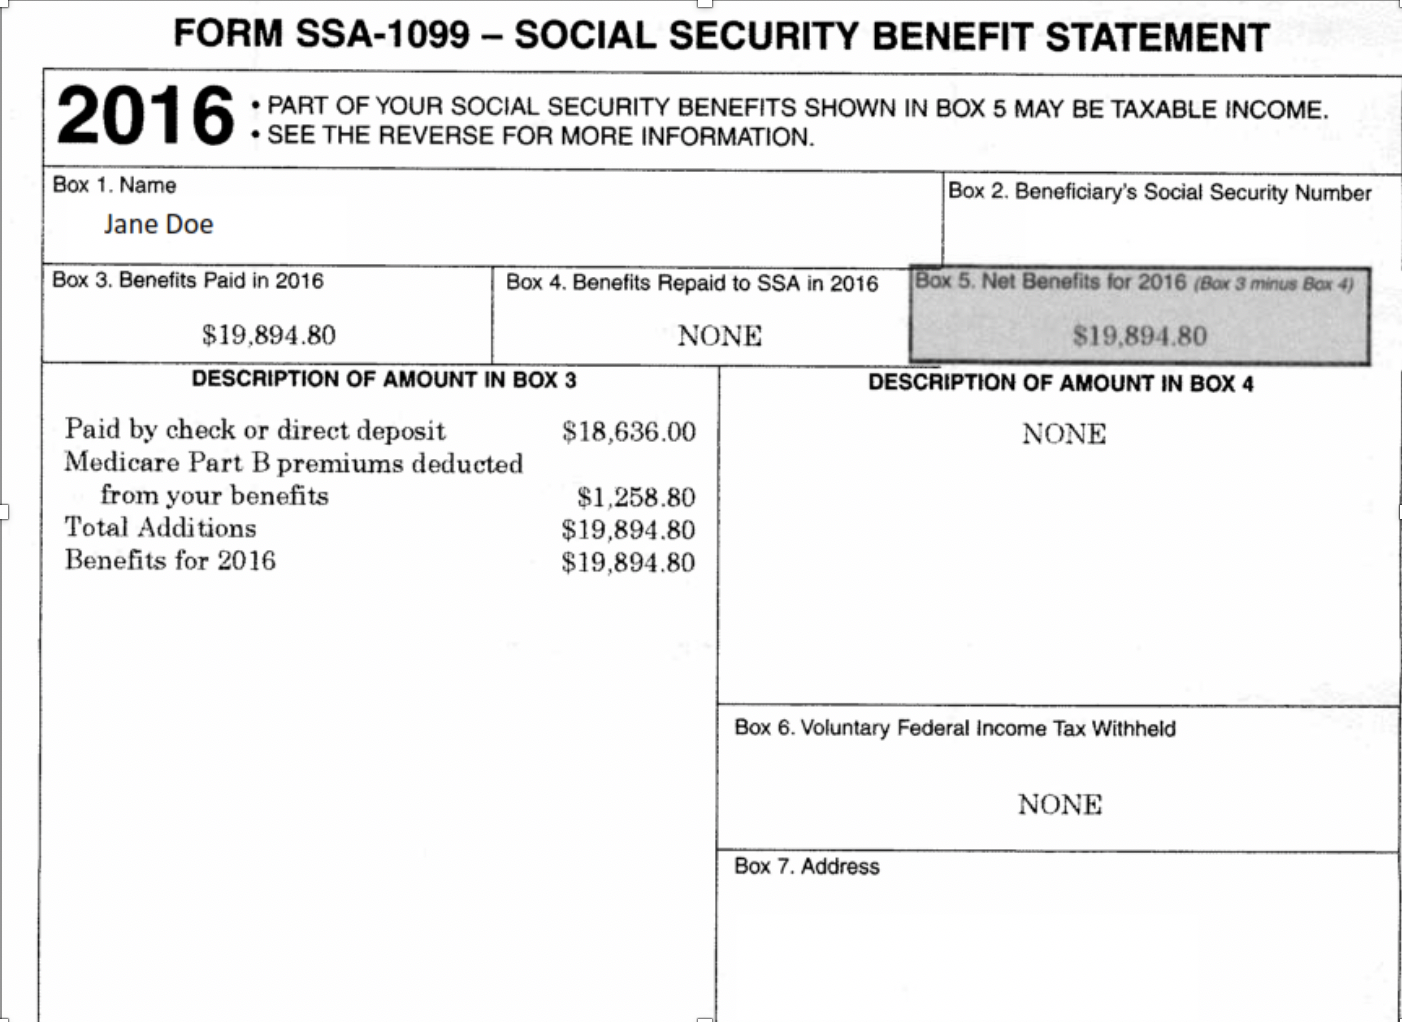 [Solved] John and Jane Doe are married retired taxpayers who care for